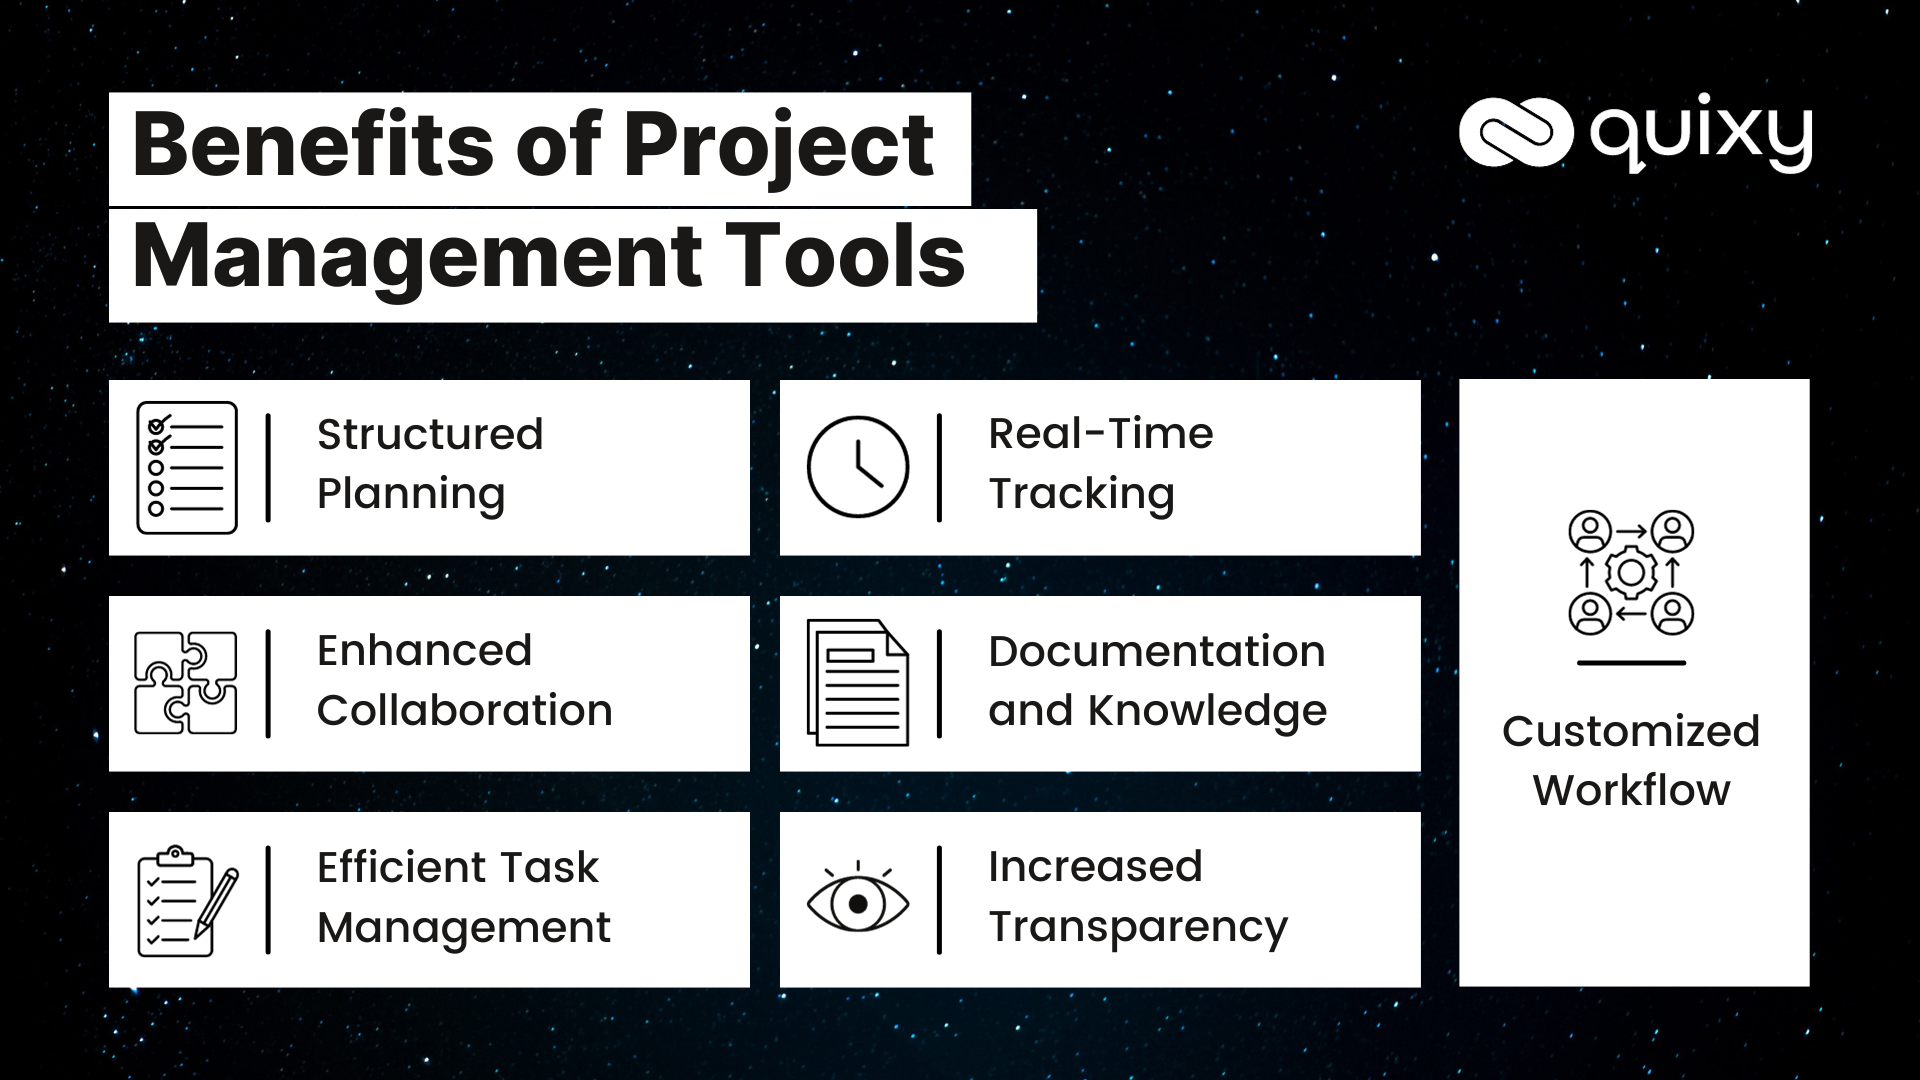 Benefits of Project management tools